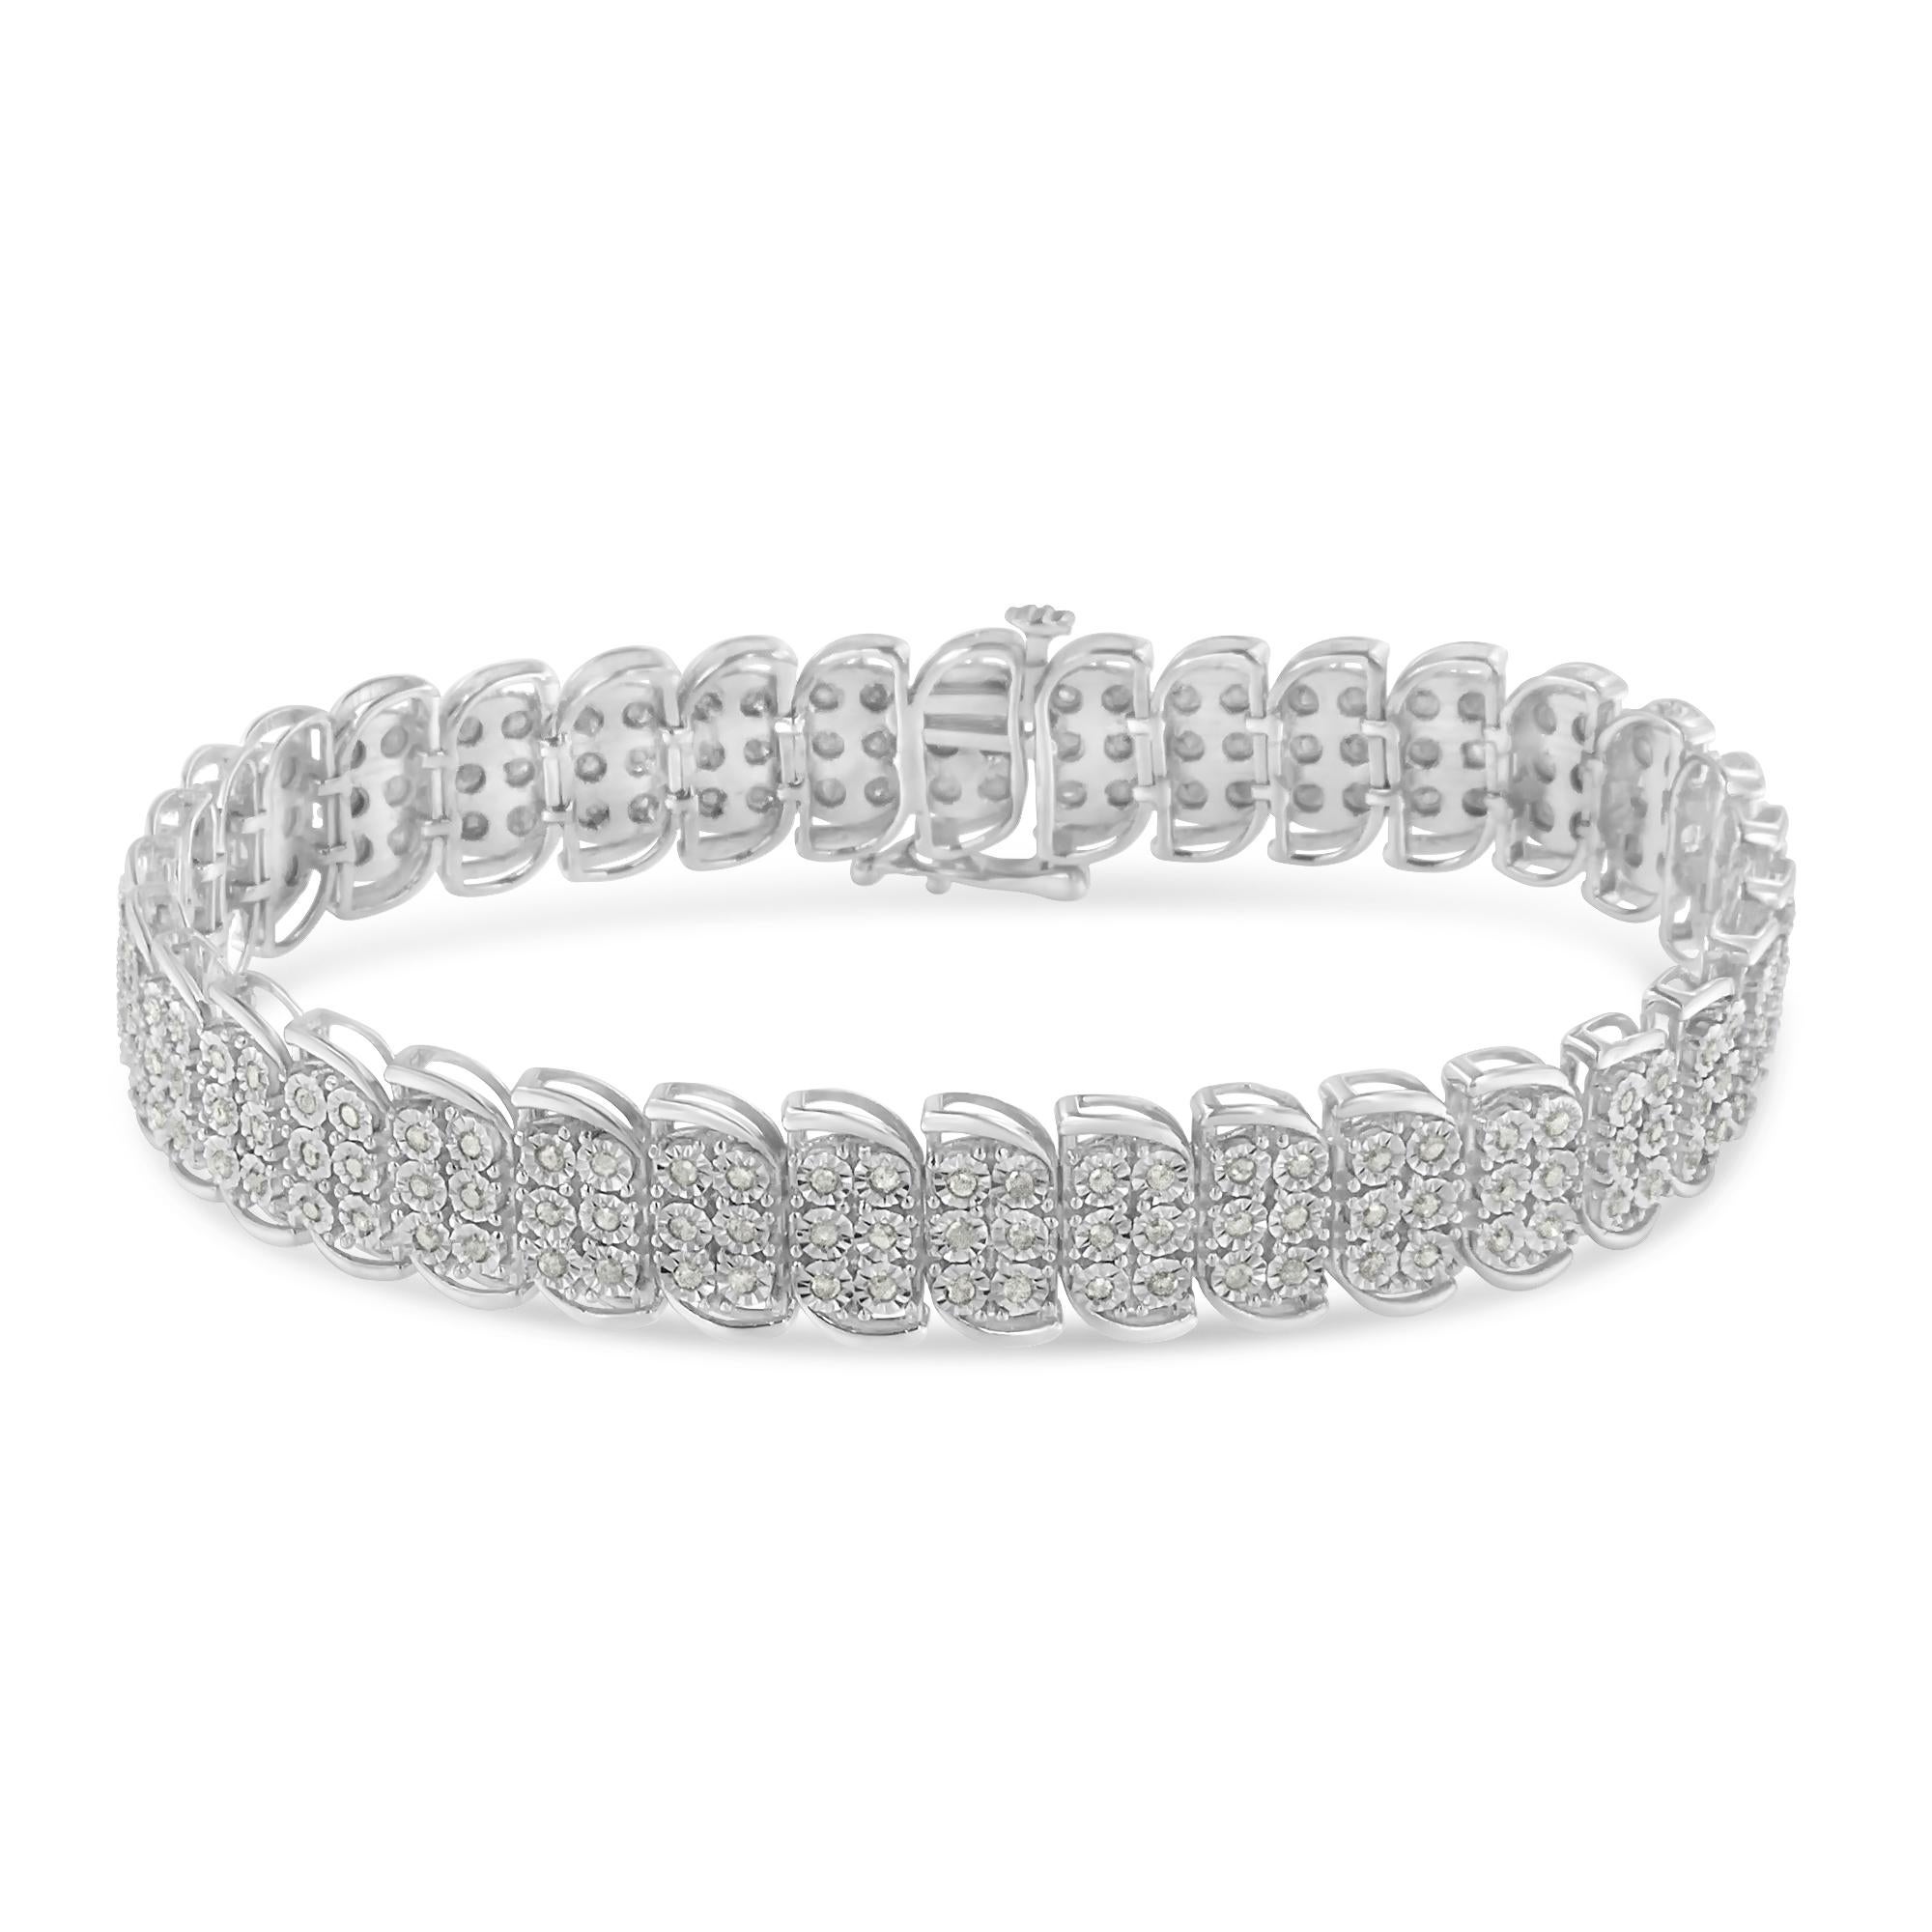 Illuminate her wrist with this stunning s-link bracelet. Crafted from the finest .925 sterling silver, this piece is embellished with 210 diamonds in a miracle setting. Weighing a total diamond weight of 2 carats, this bracelet is the perfect